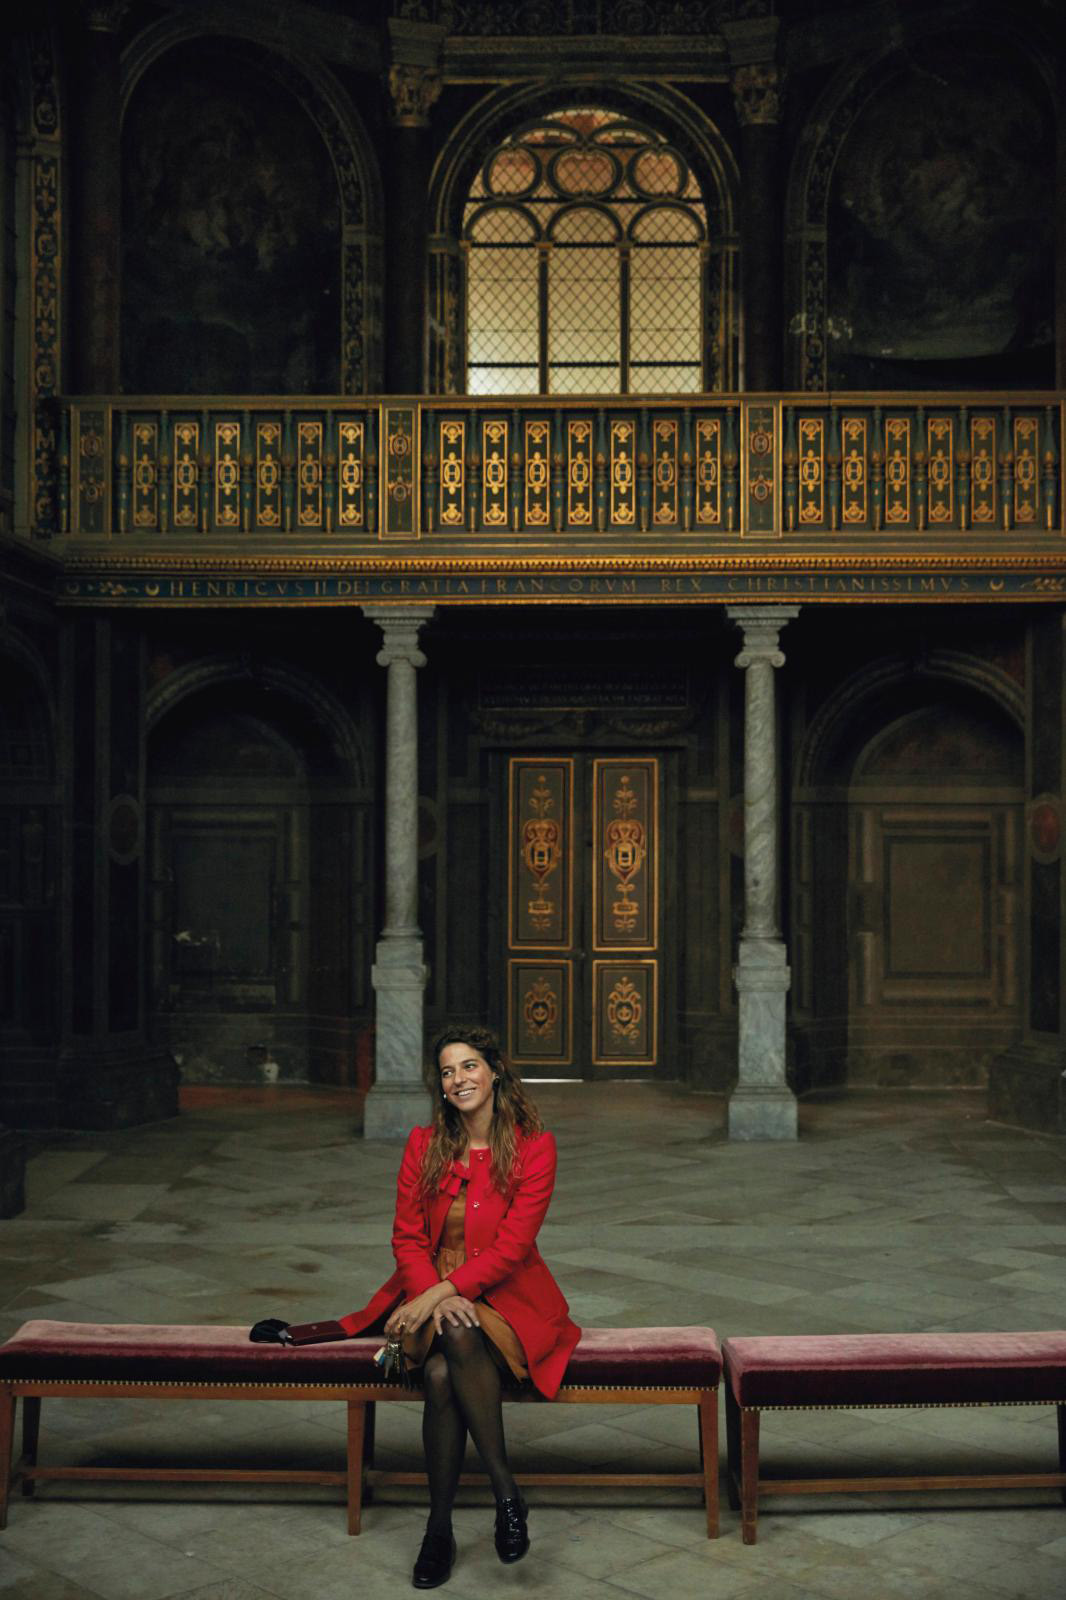 Oriane Beaufils: Anchoring the Château de Fontainebleau in Modernity